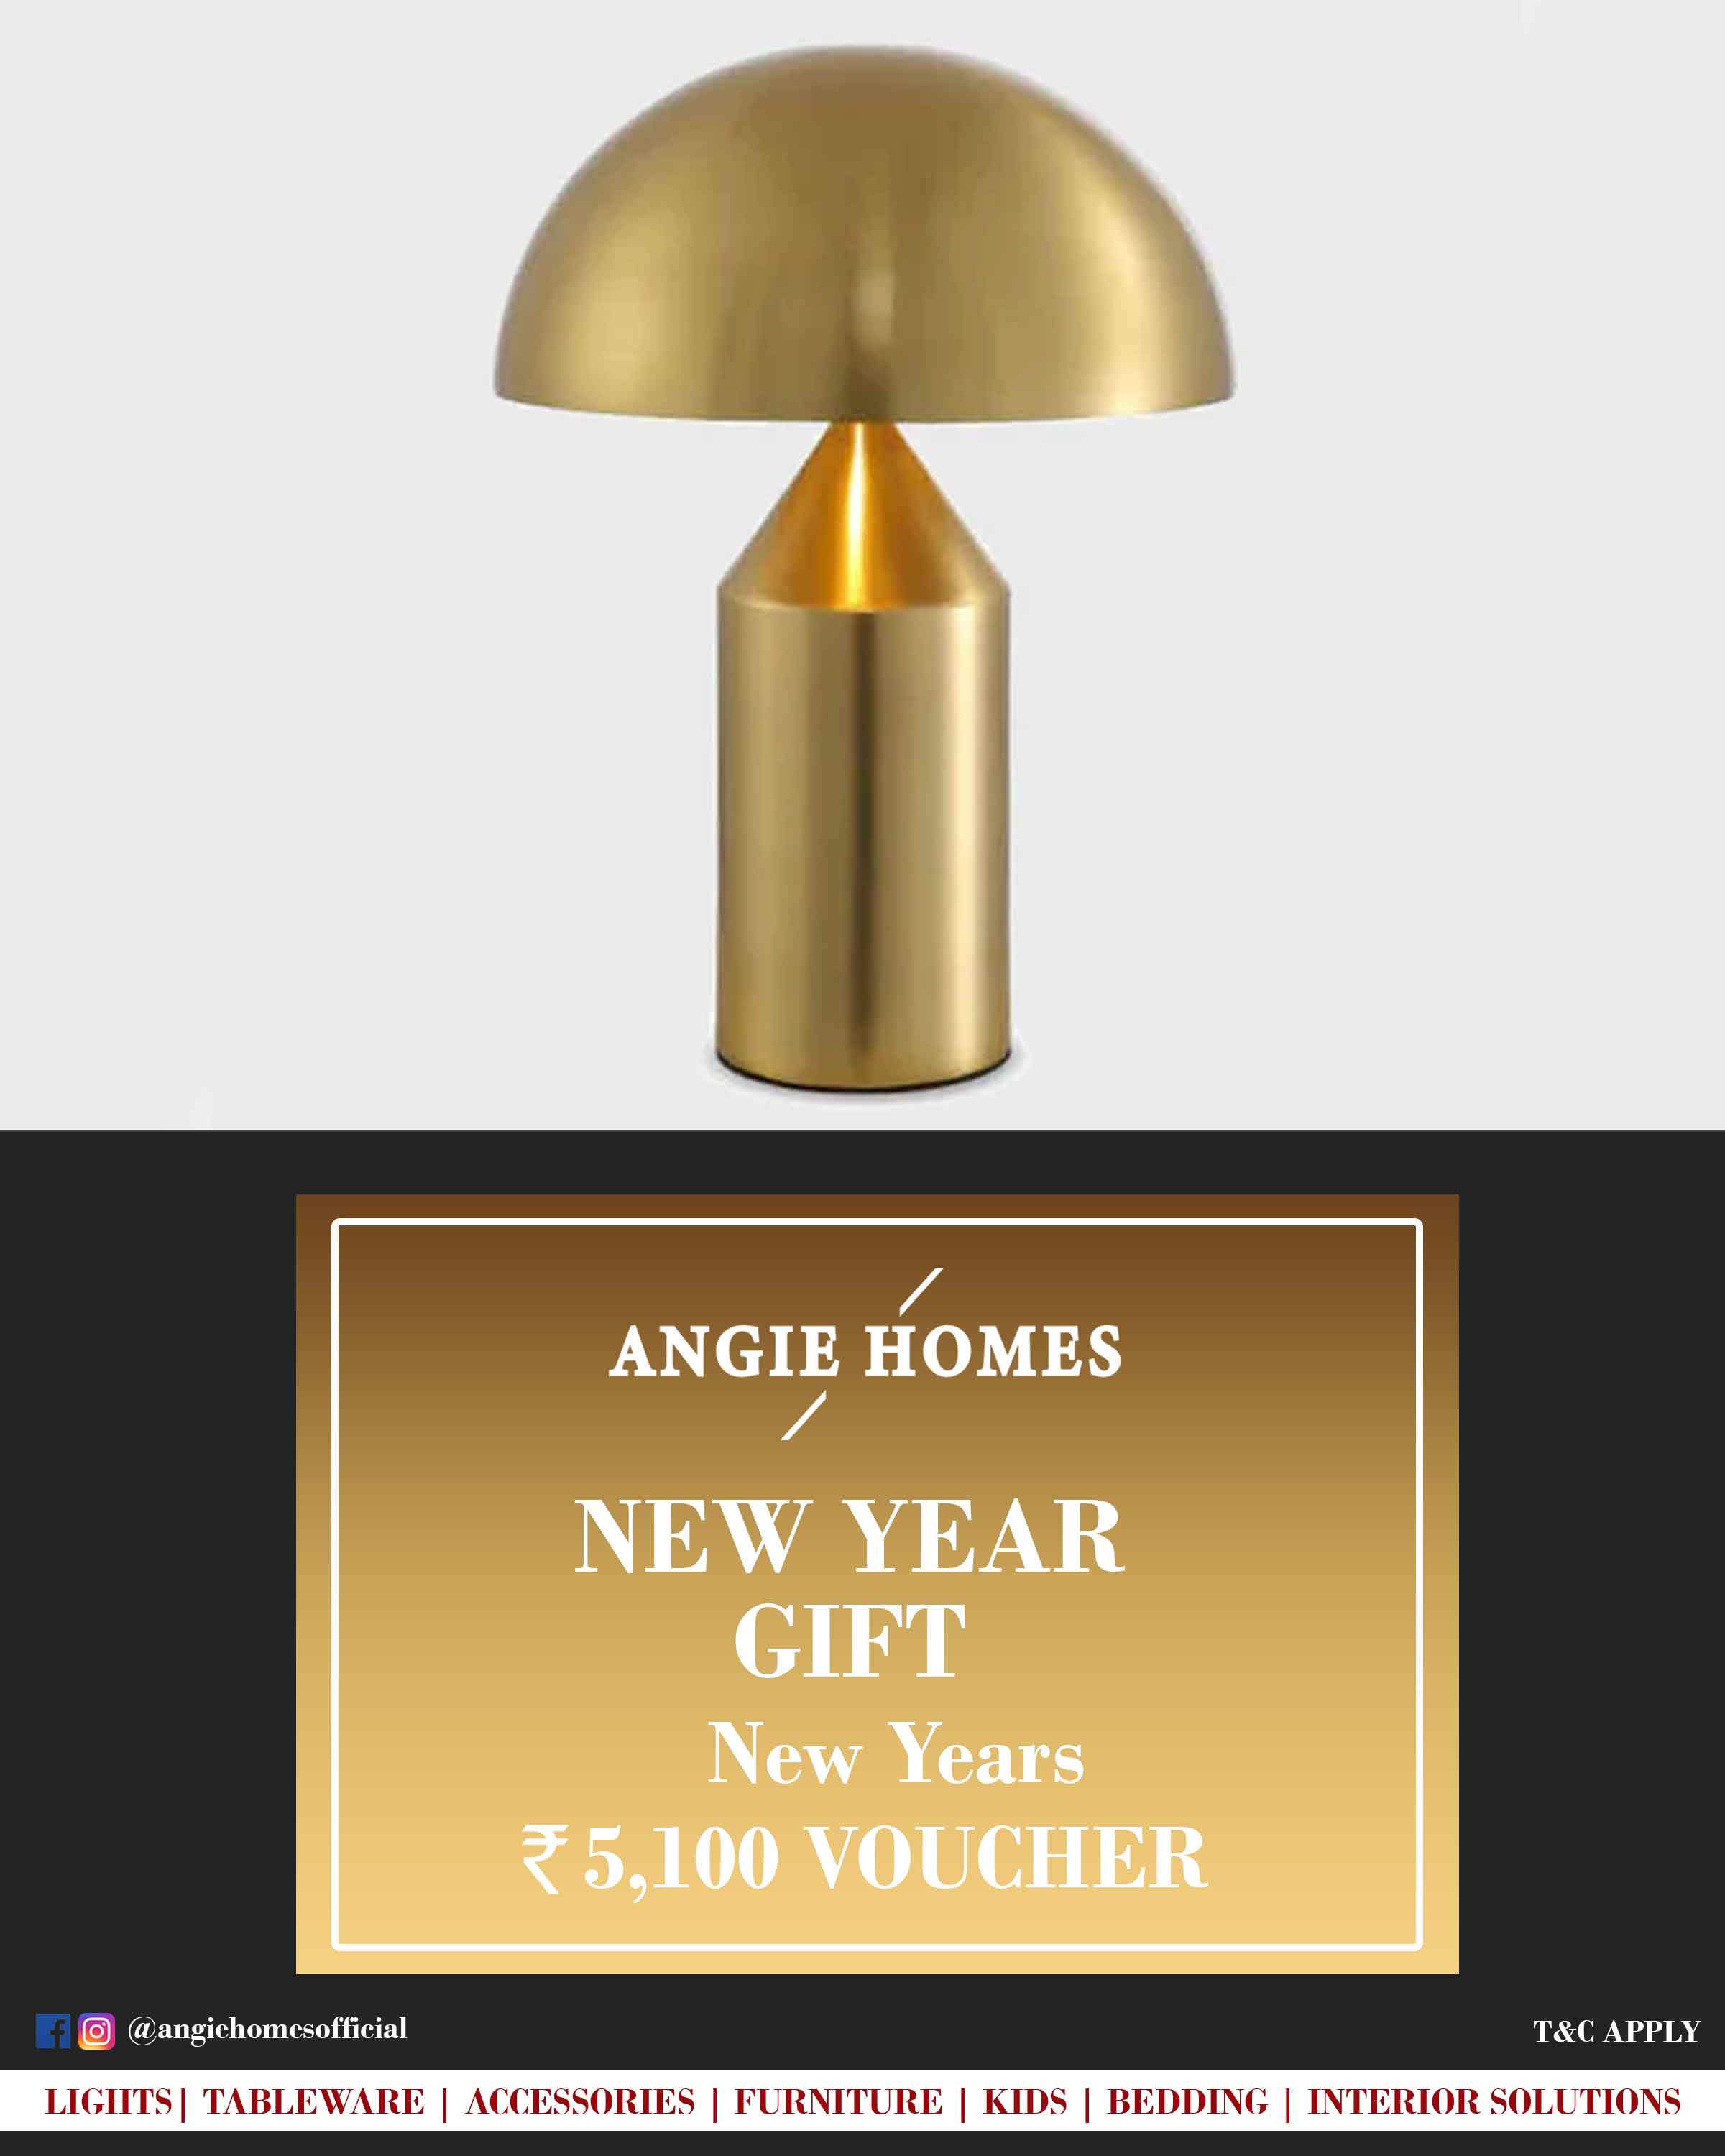 Best New Year Gift Card Voucher for Table Lamps - Angie Homes ANGIE HOMES